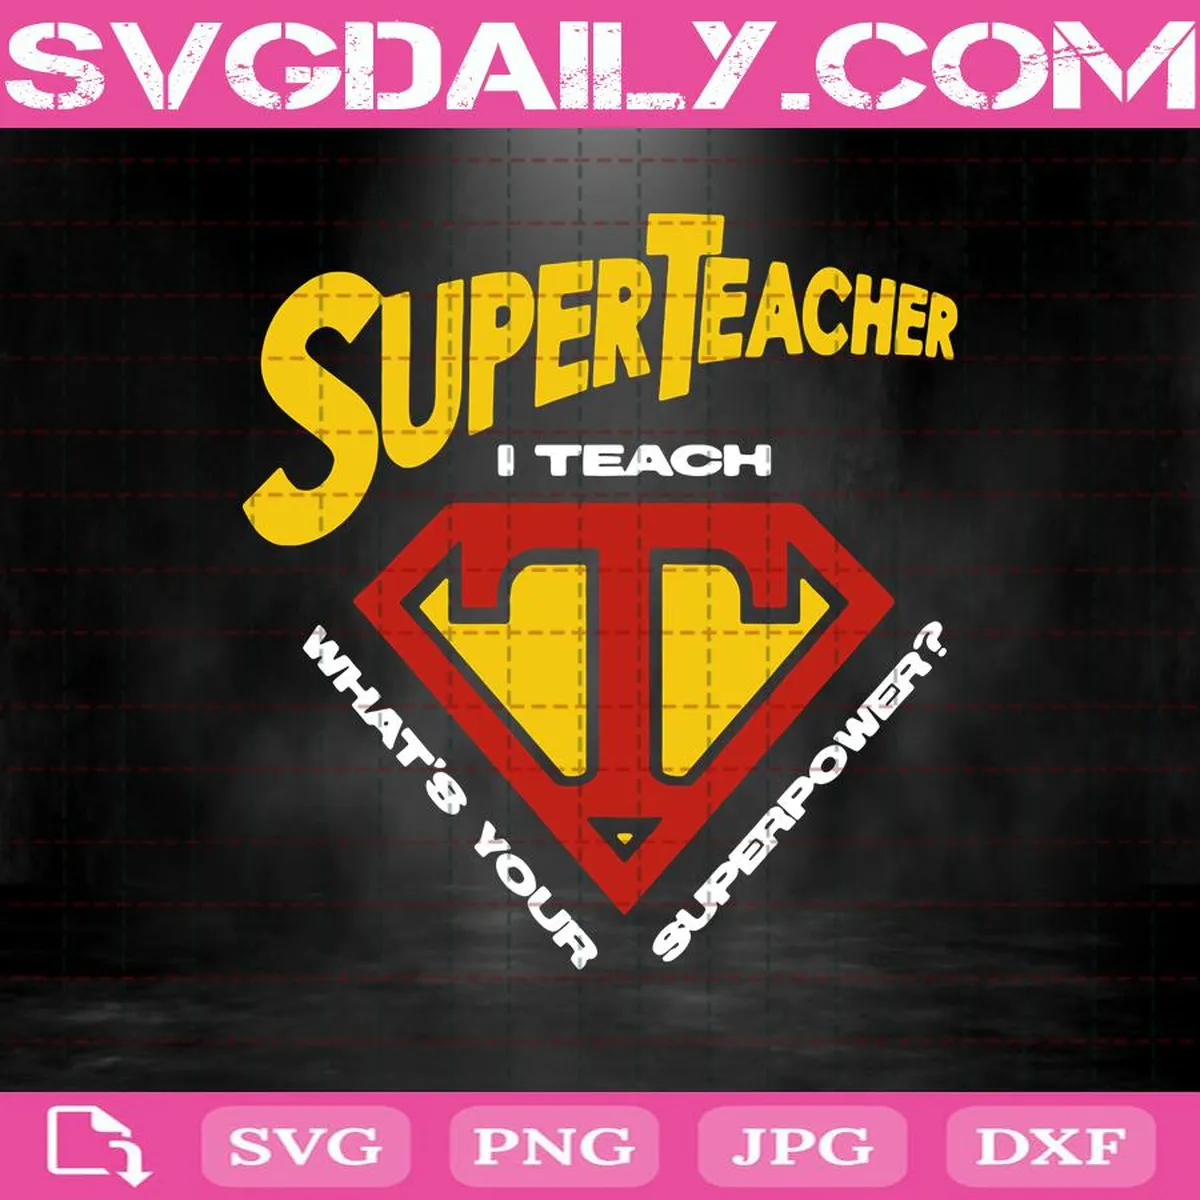 Super Teacher I Teach What’s Your Superpower Svg, Super Teacher Svg, Teacher Svg, Teacher Gift Svg, Svg Png Dxf Eps AI Instant Download